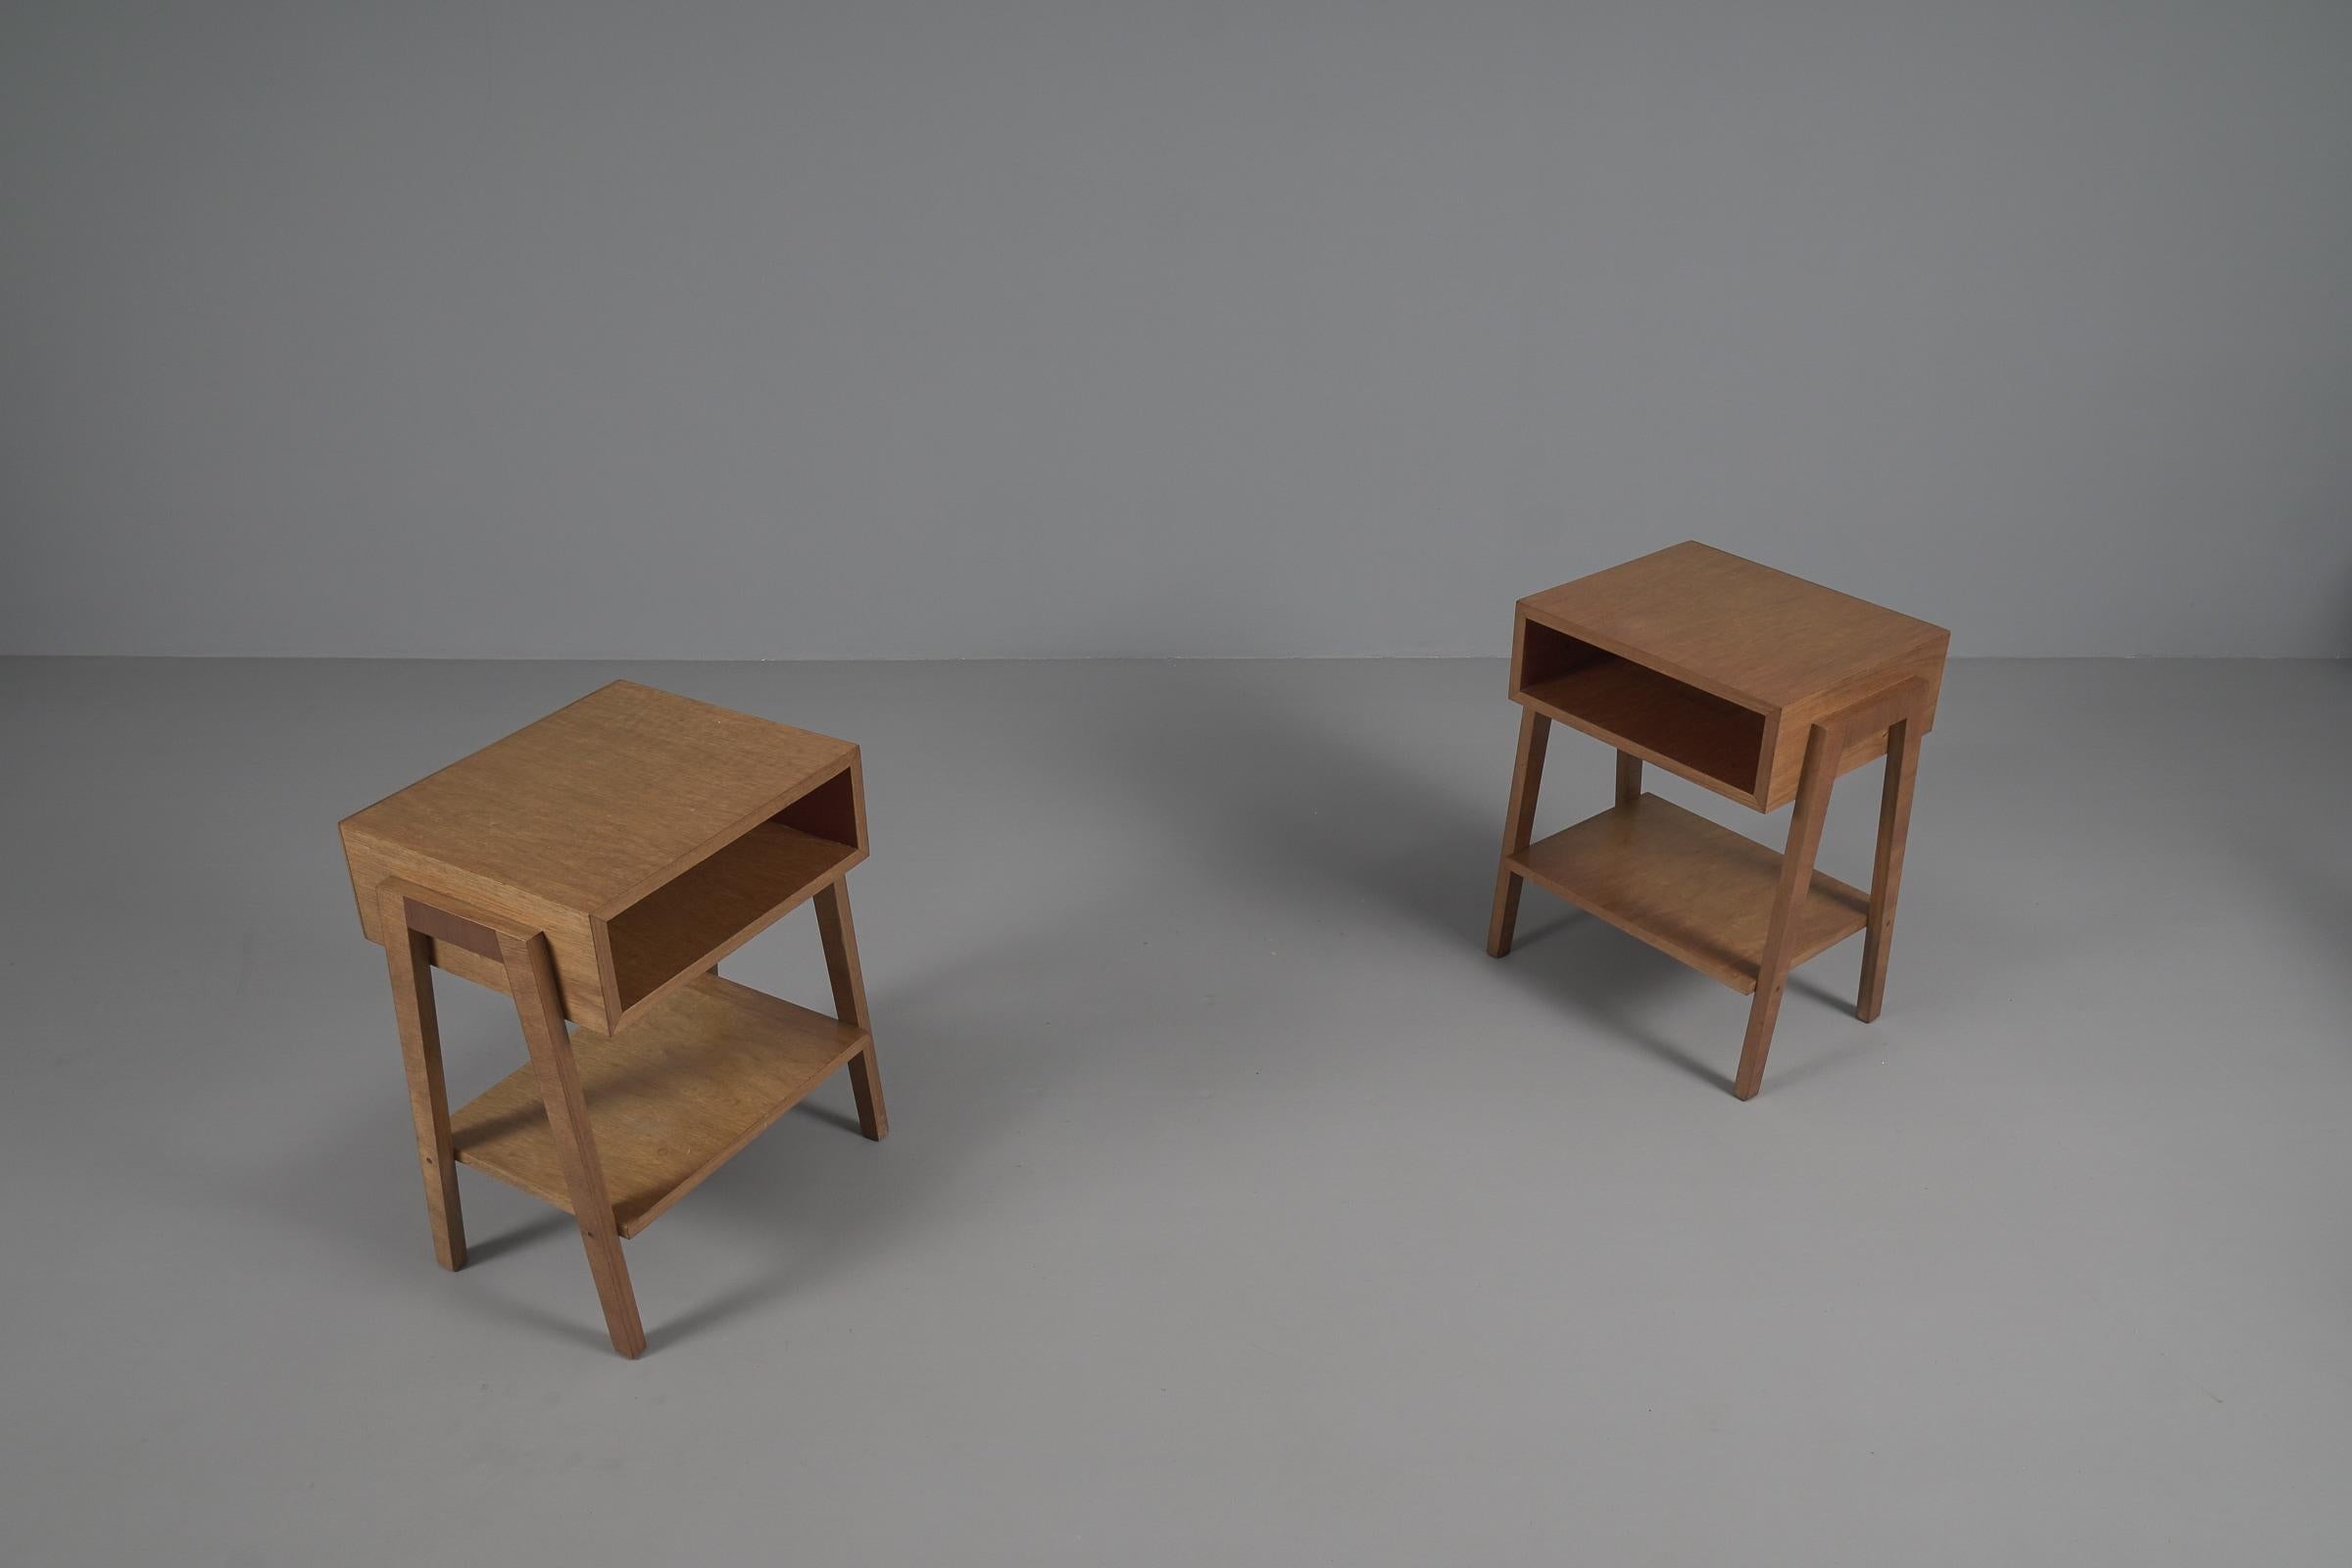 Brass  Pair of Minimalistic Mid-Century Modern Wooden Nightstands, Italy 1950s For Sale